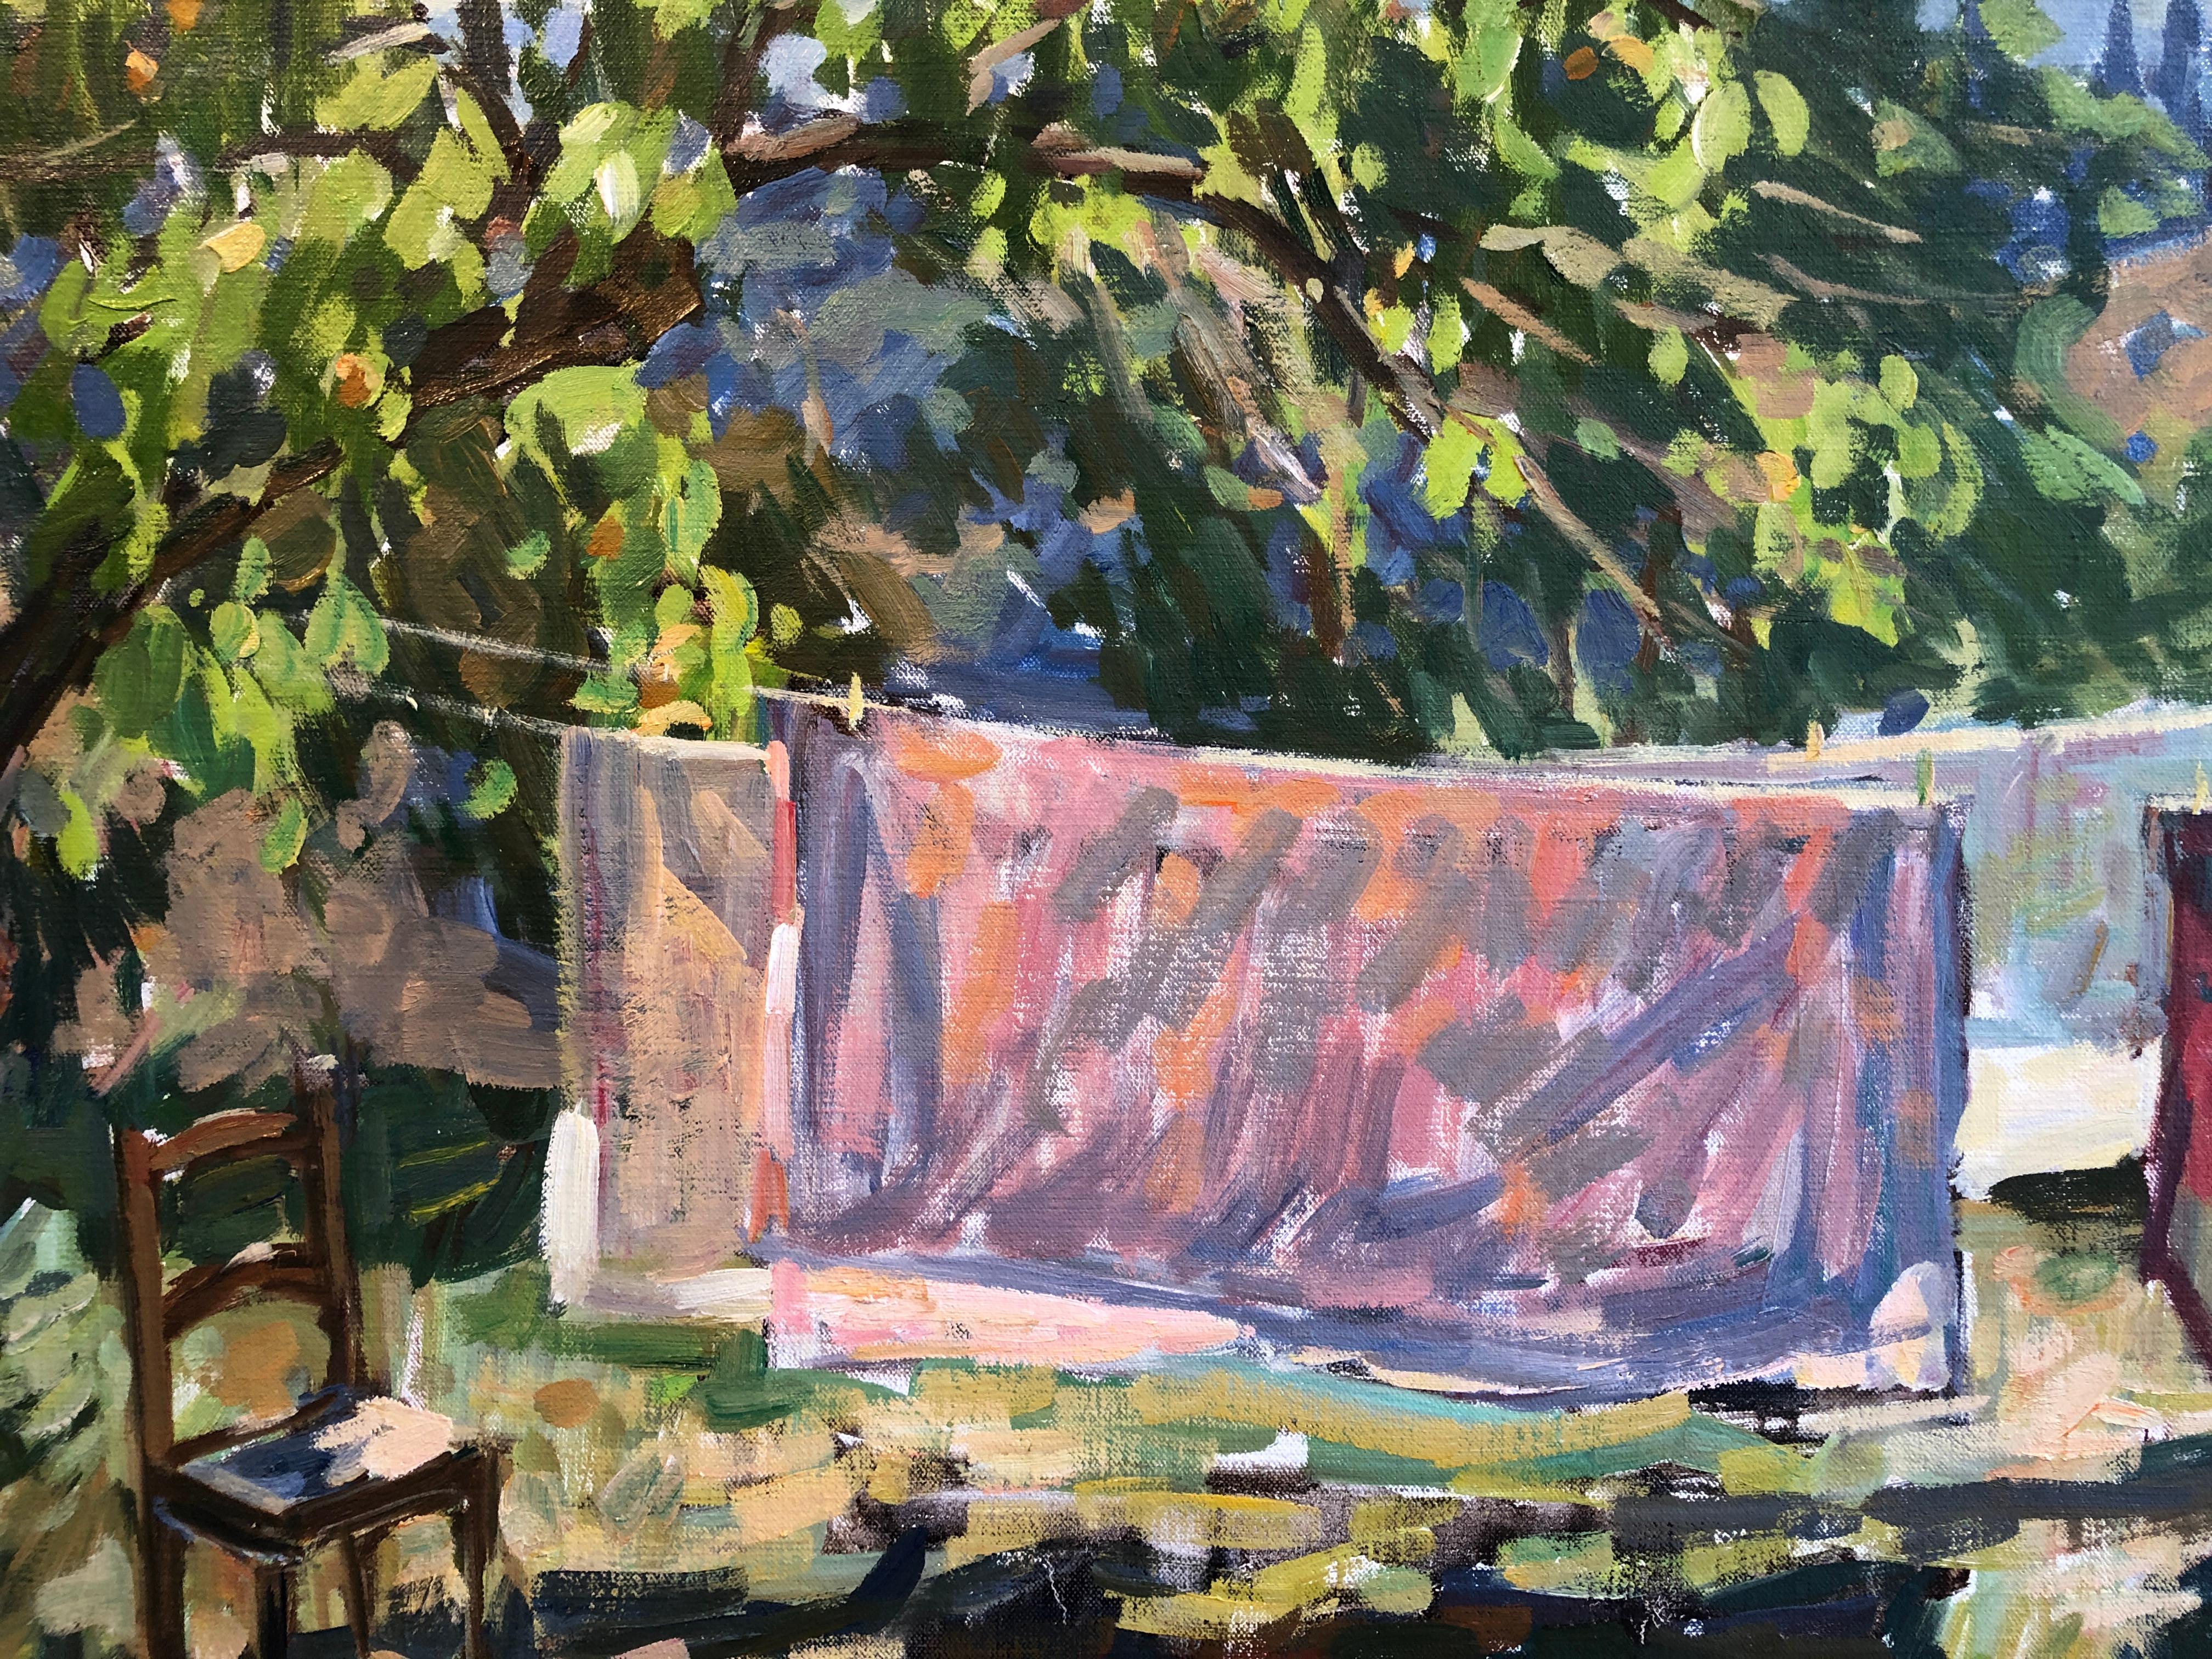 Apricots and Laundry - Impressionist Painting by Ben Fenske